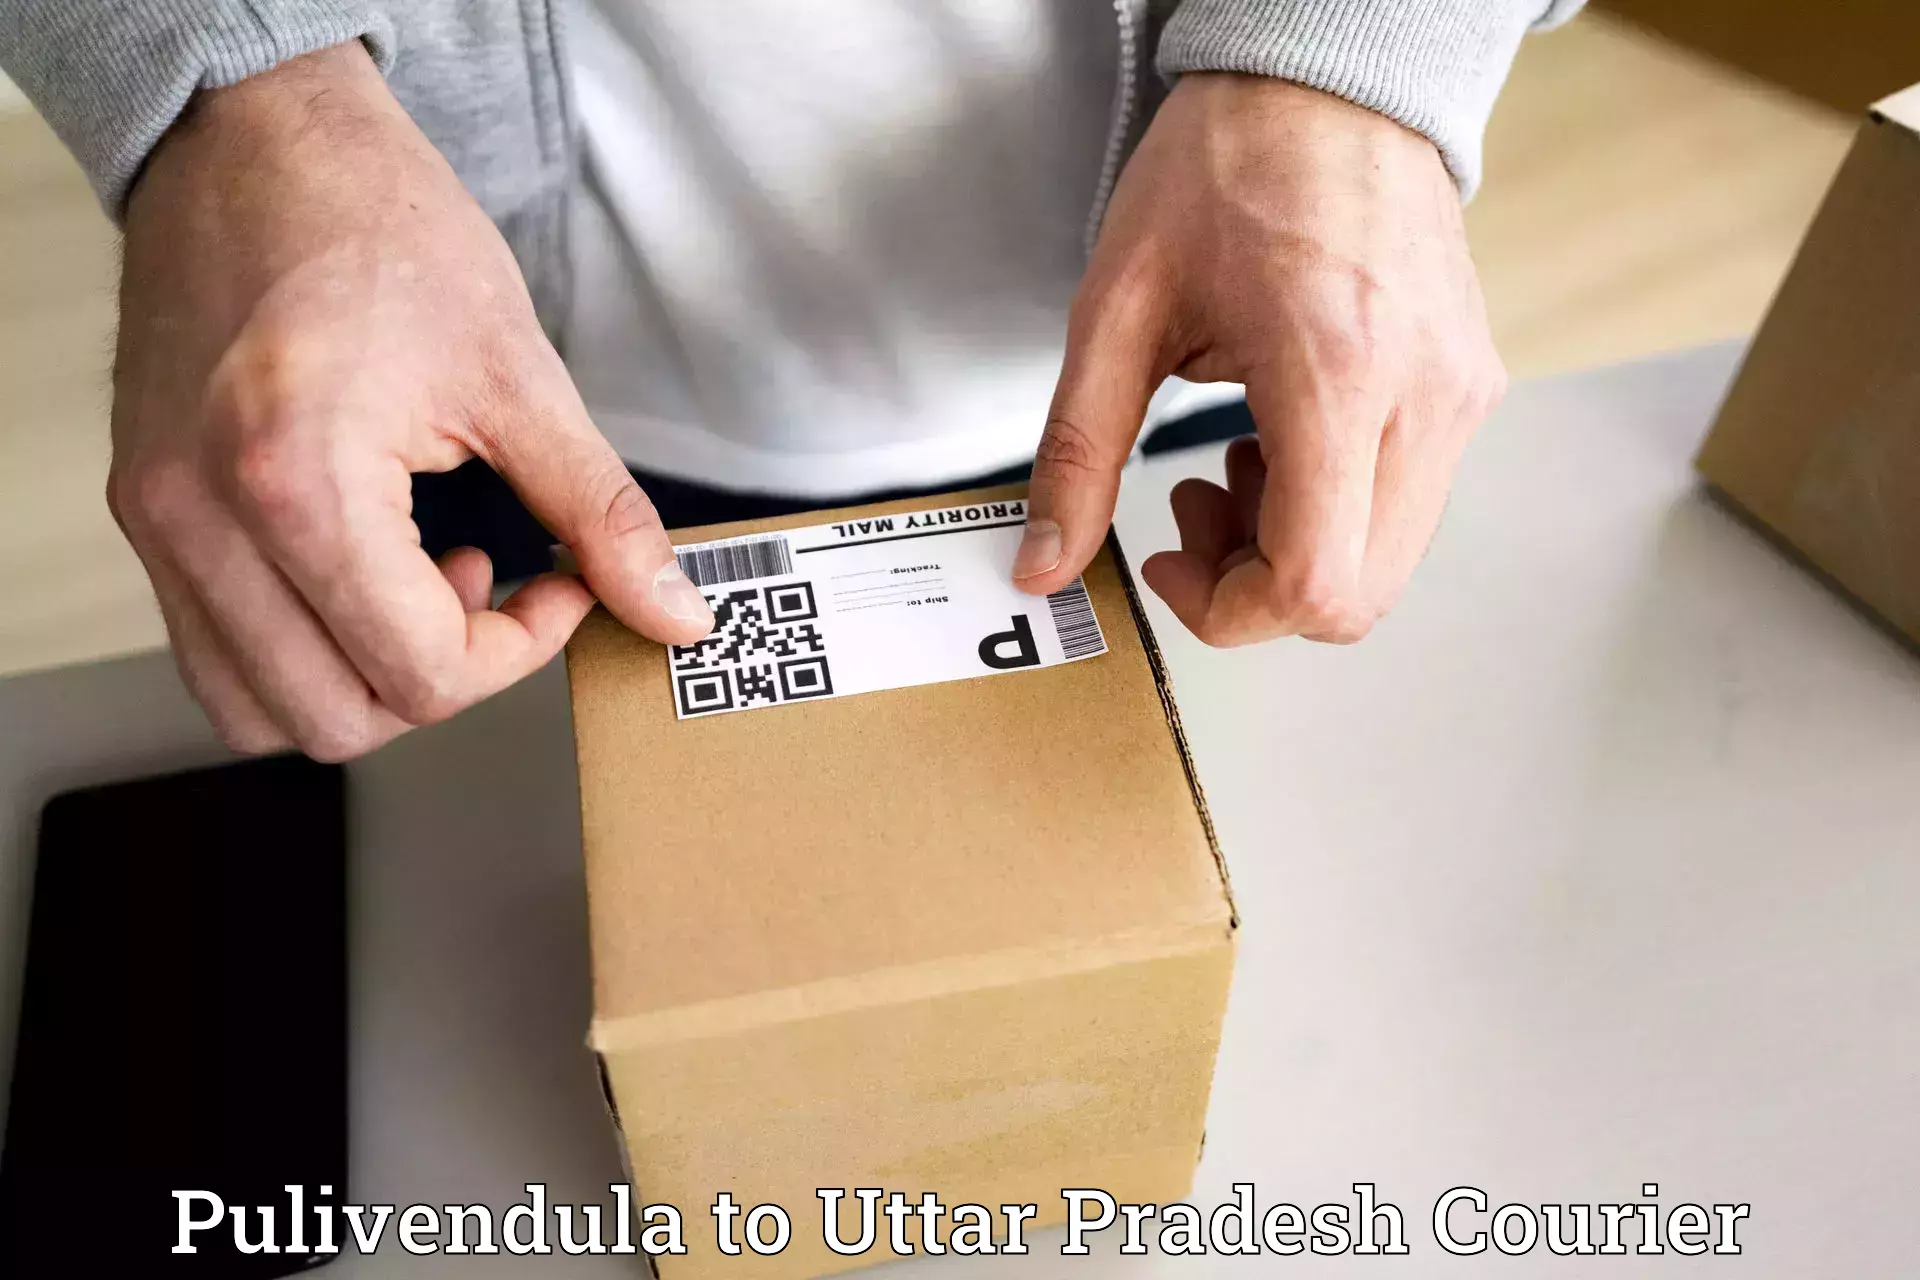 Nationwide shipping capabilities Pulivendula to Aligarh